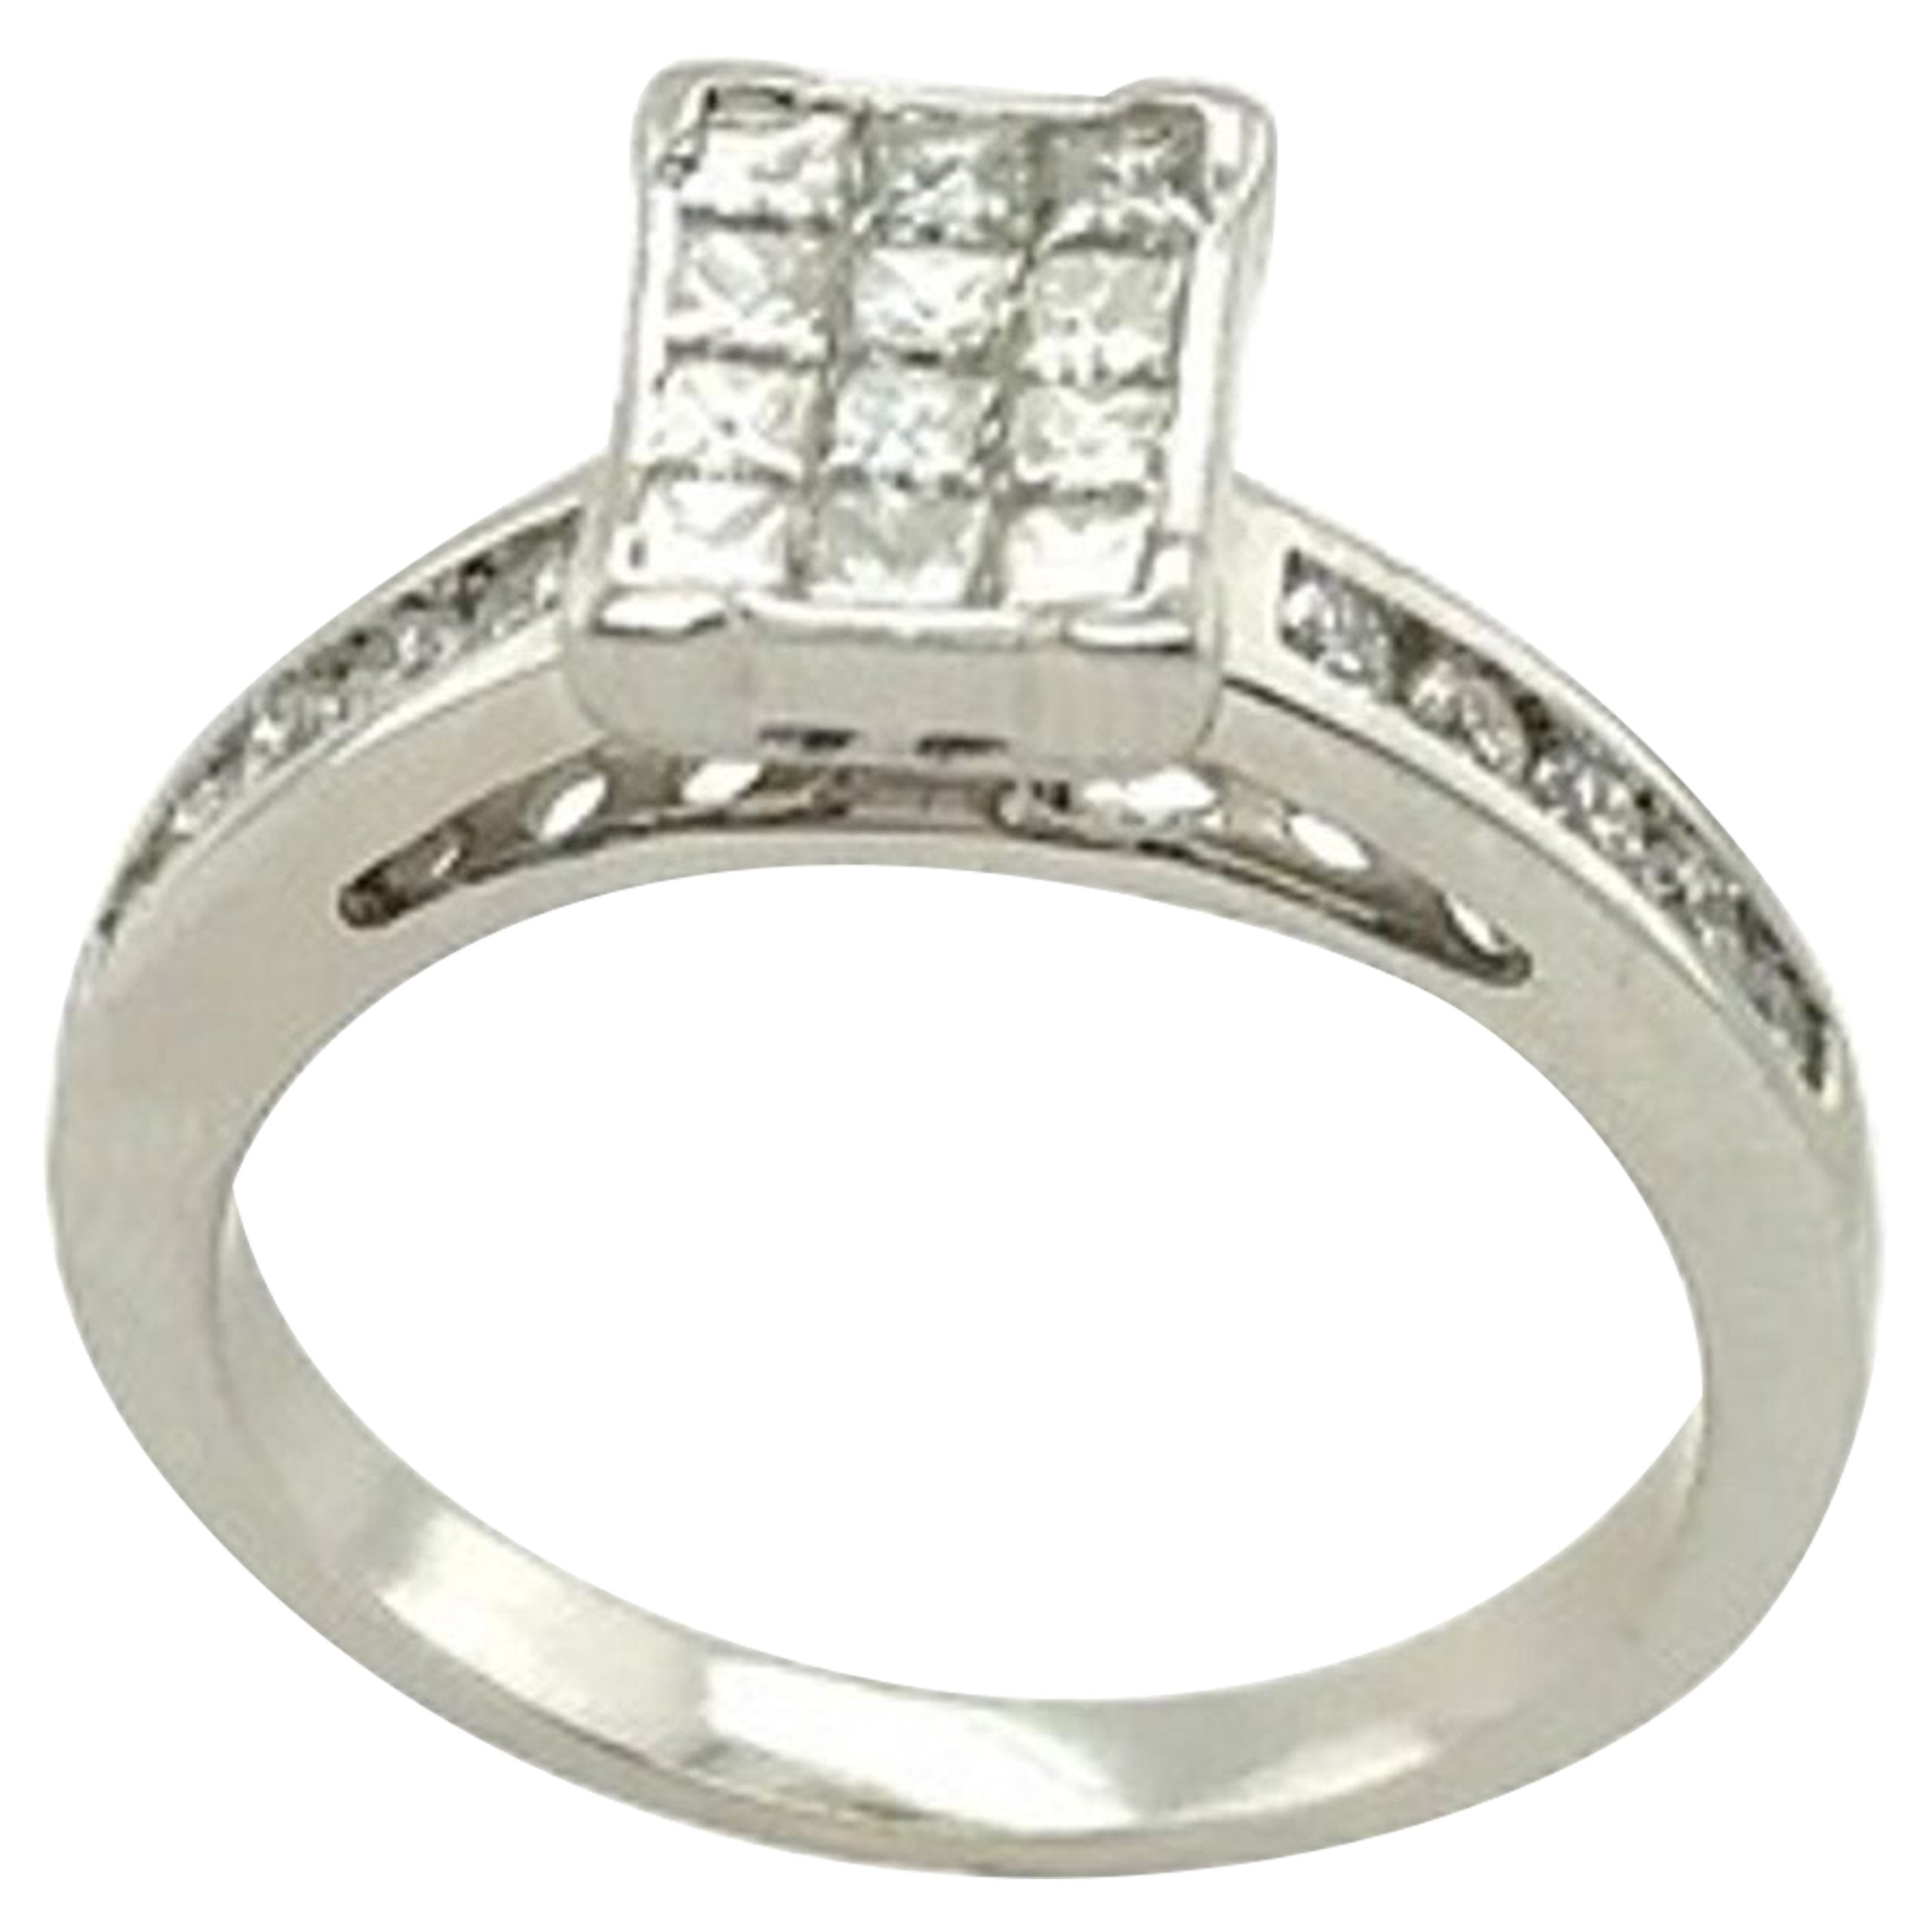 Classic Princess Cut Diamond Ring Set with 0.85ct of Diamonds in 18ct White Gold